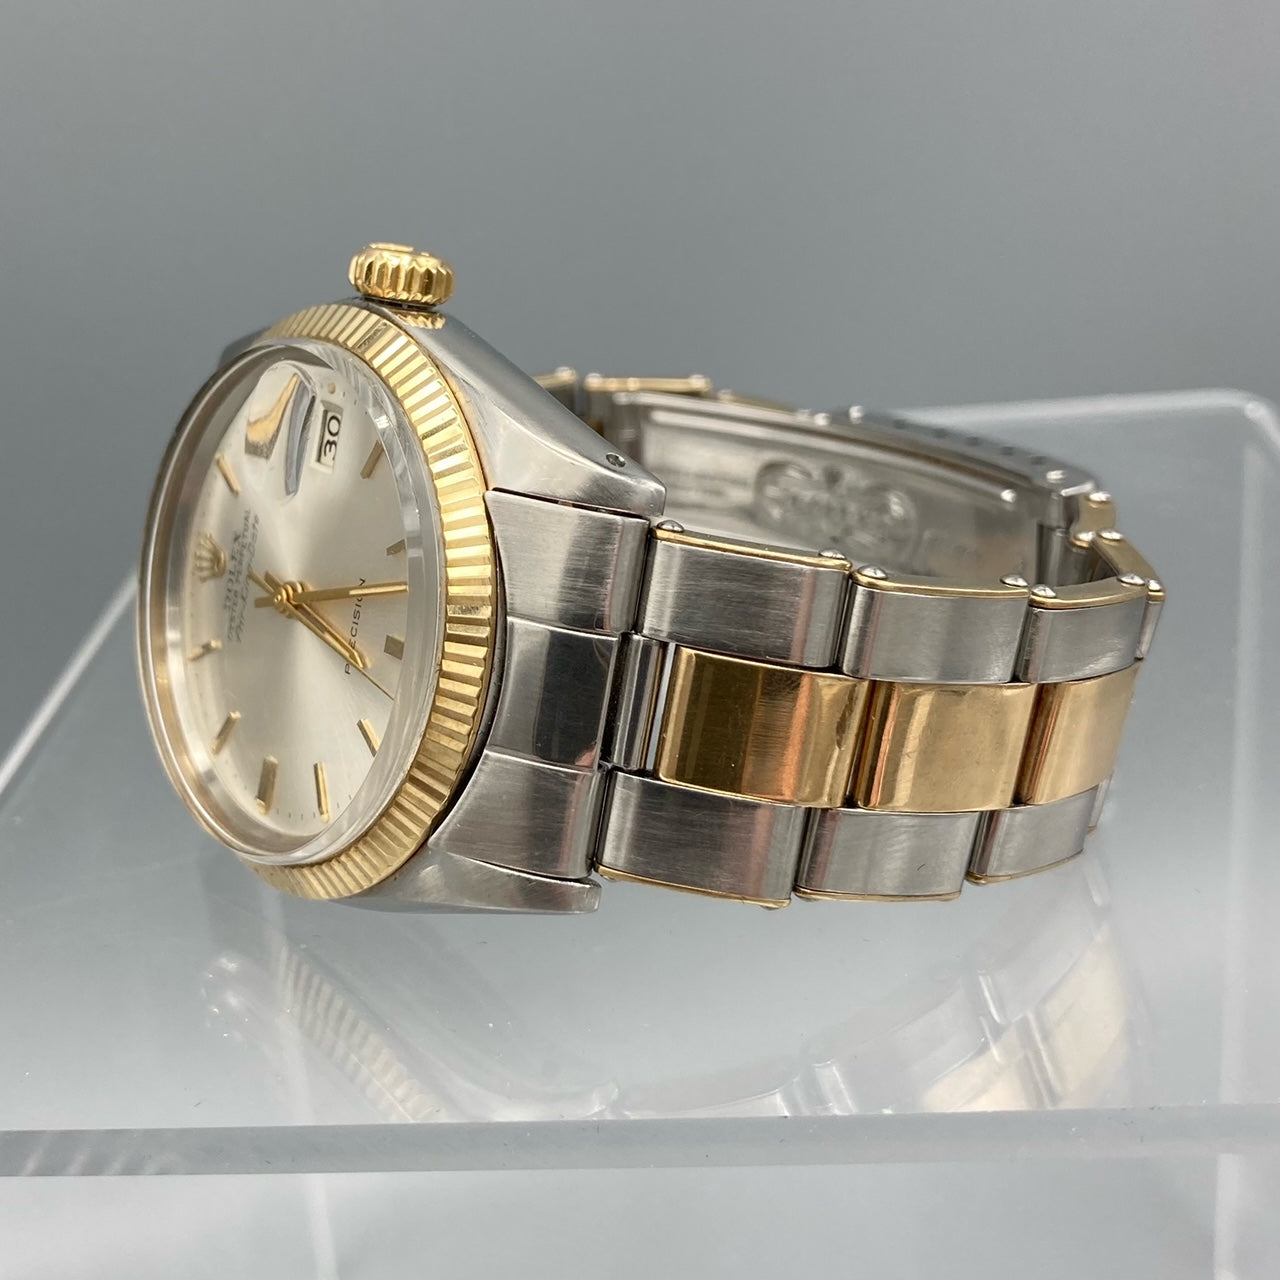 Rolex Oyster Perpetual Air-King-Date 5701 Circa. 1967 Two-Tone Rare